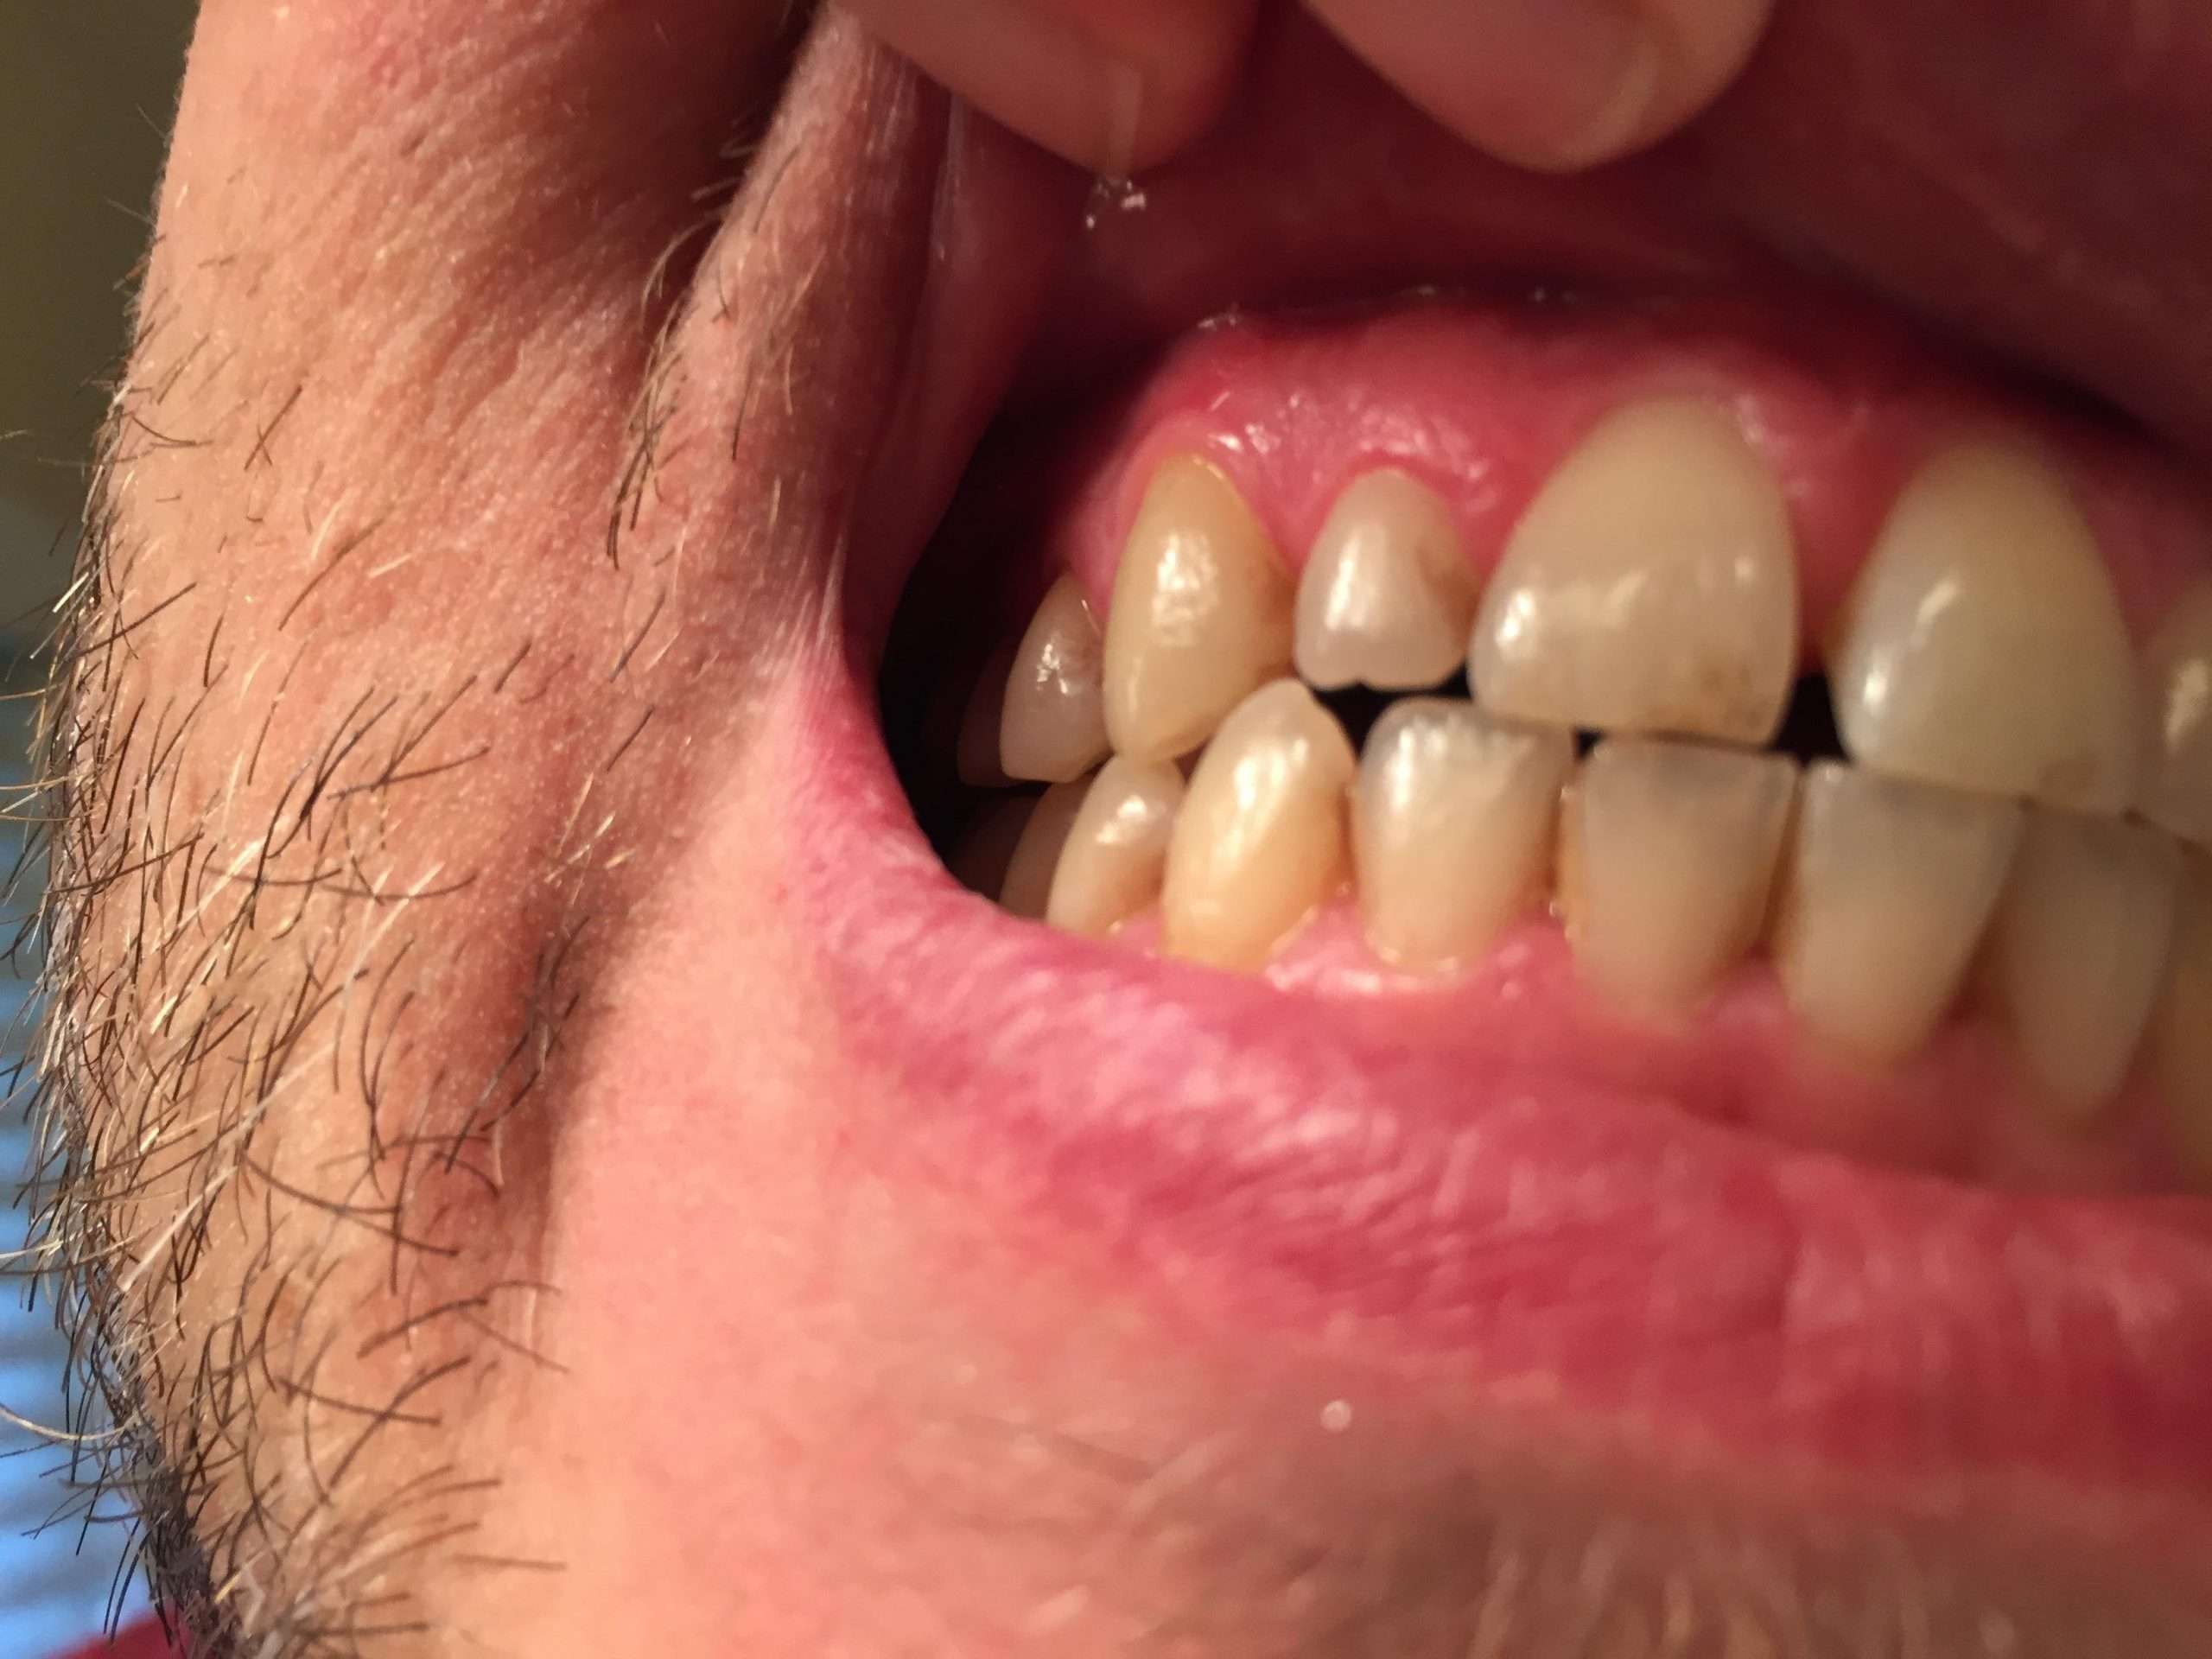 Brown stains recently appeared on the sides of my teeth and near my ...